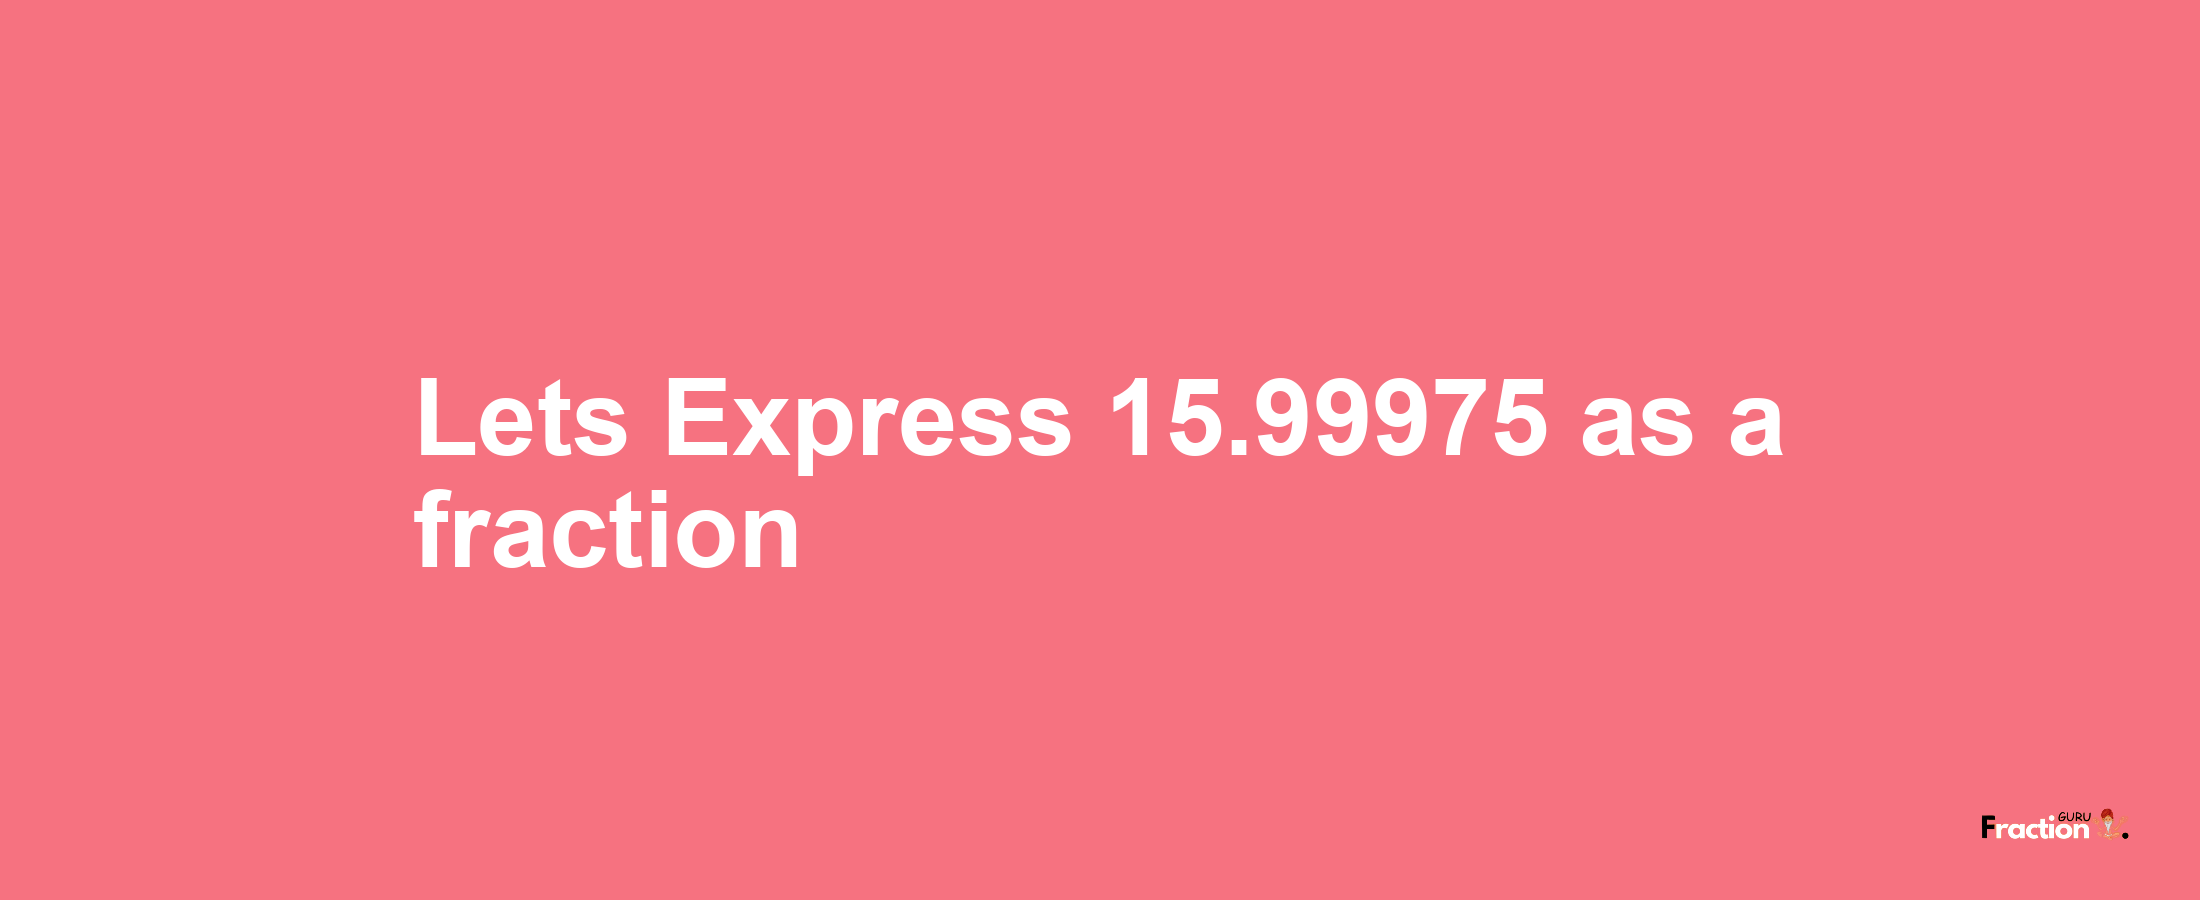 Lets Express 15.99975 as afraction